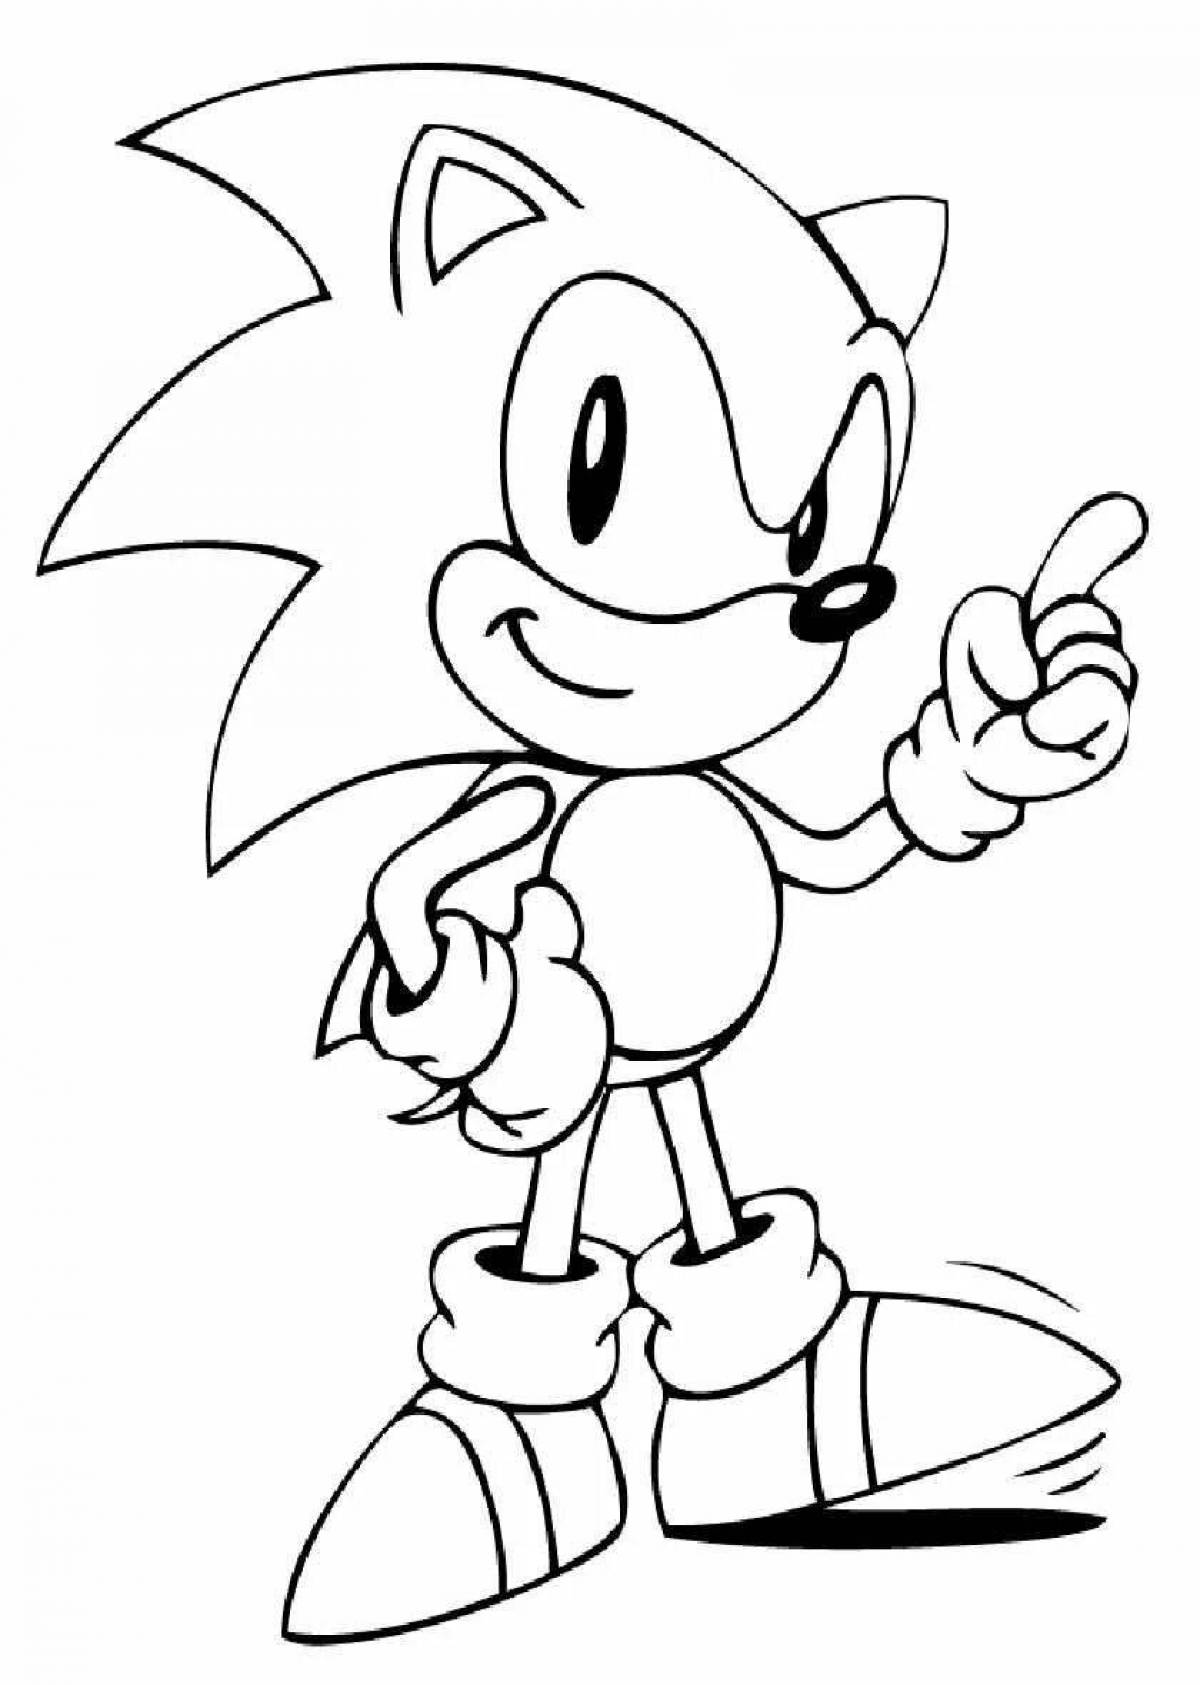 Sonic boom style coloring book